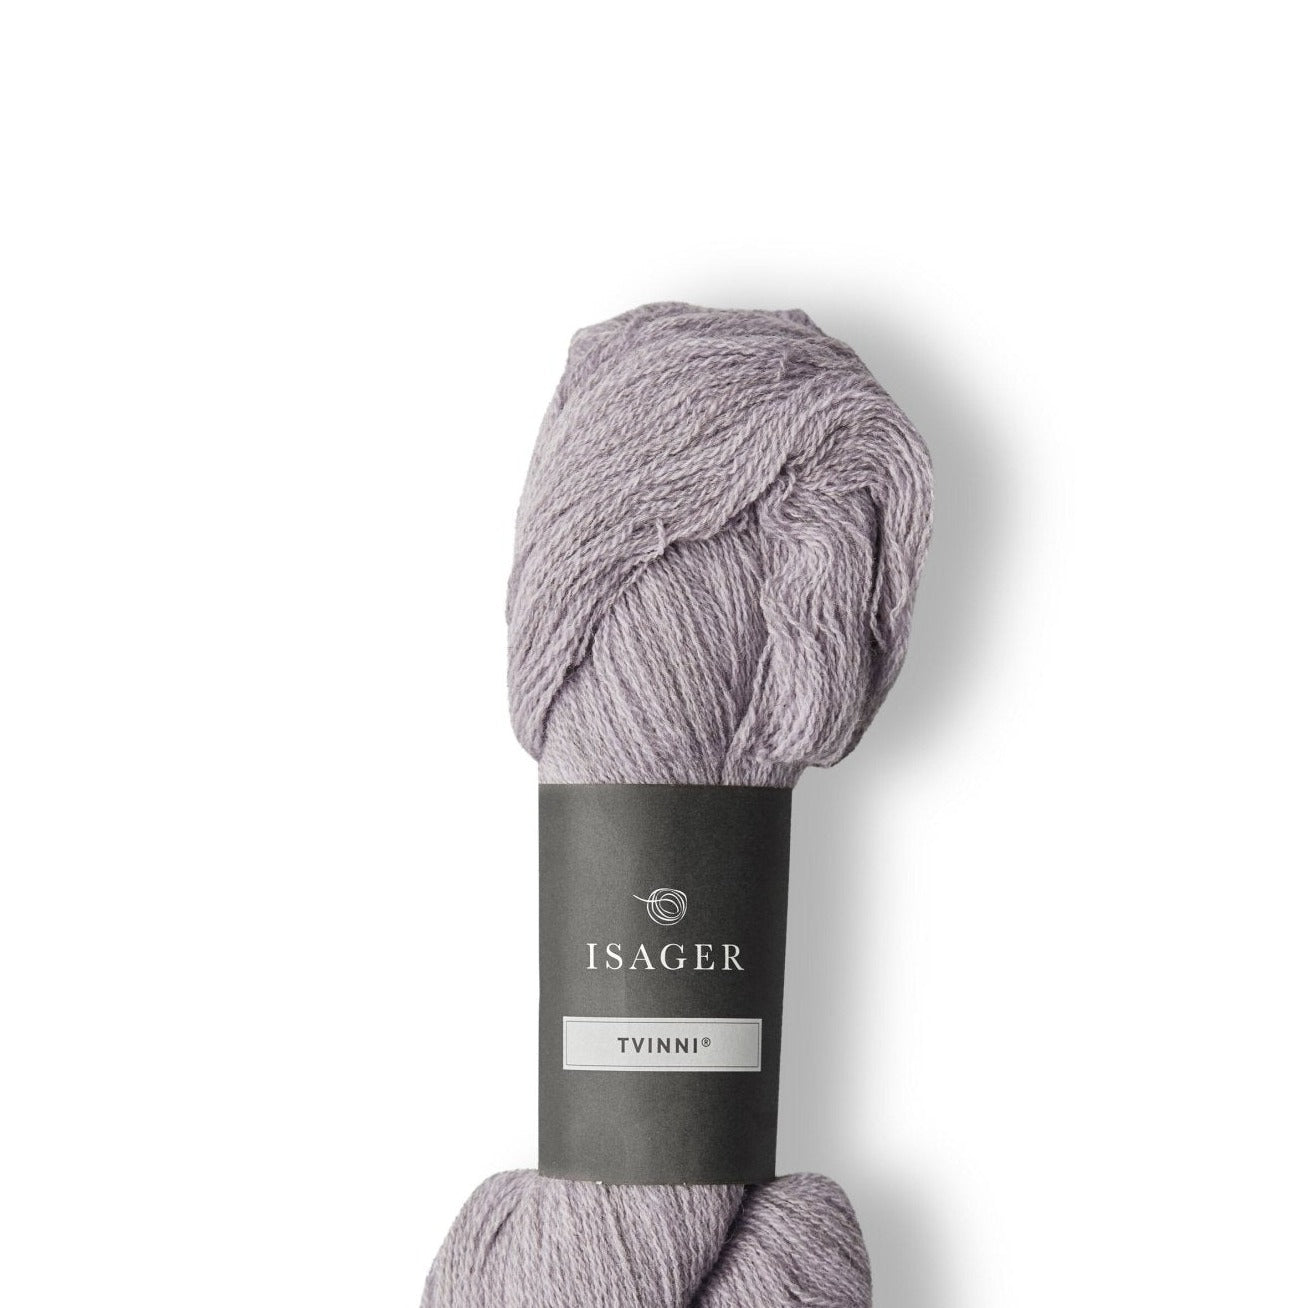 Isager Tvinni - 12s - 4 Ply - Isager - The Little Yarn Store